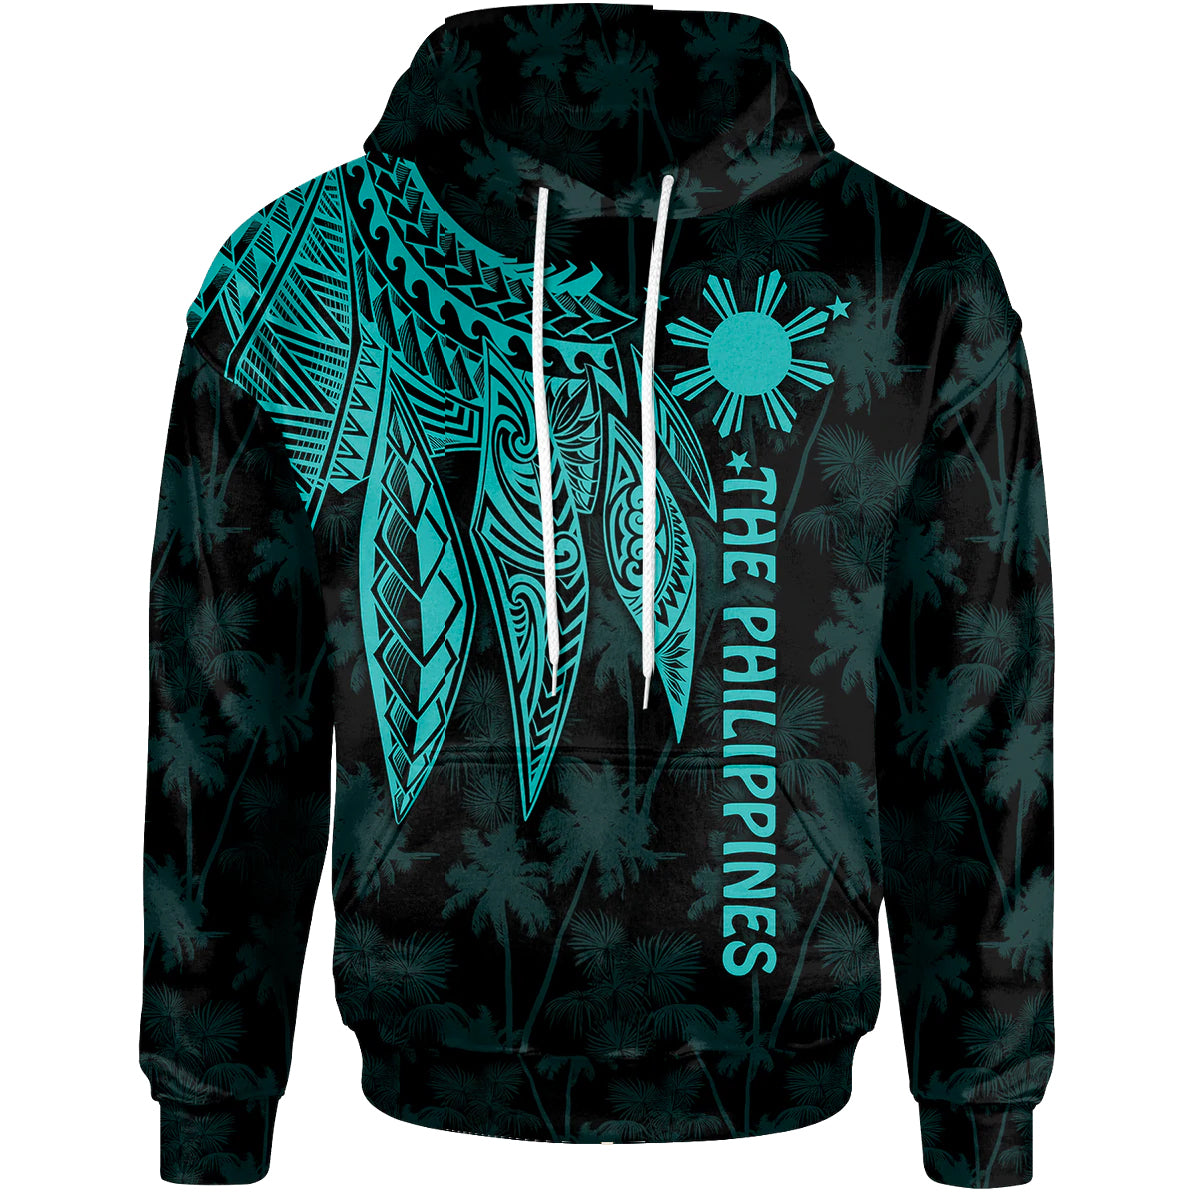 The Philippines Hoodie Polynesian Wings (TurQuoiSe) Turquoise - Polynesian Pride